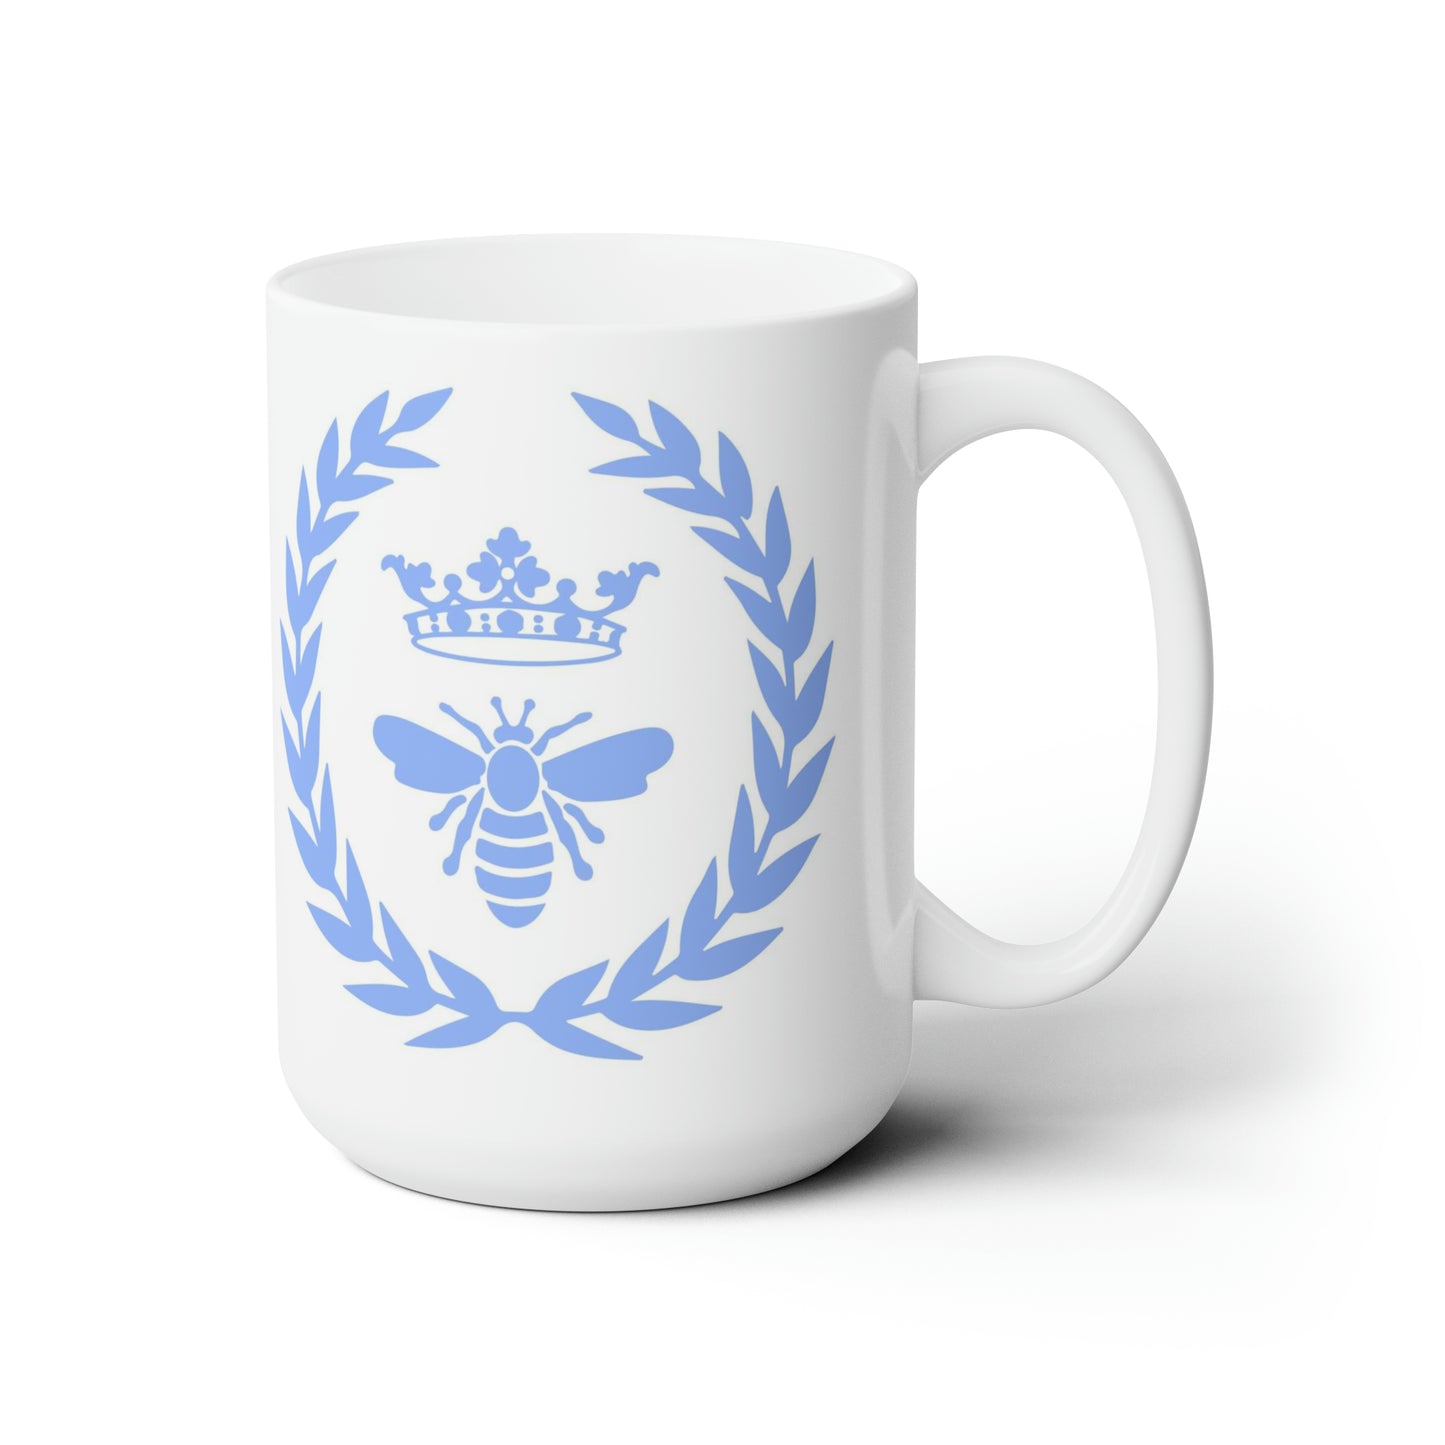 Queen Bee Ceramic Mug - Available In 4 Colors